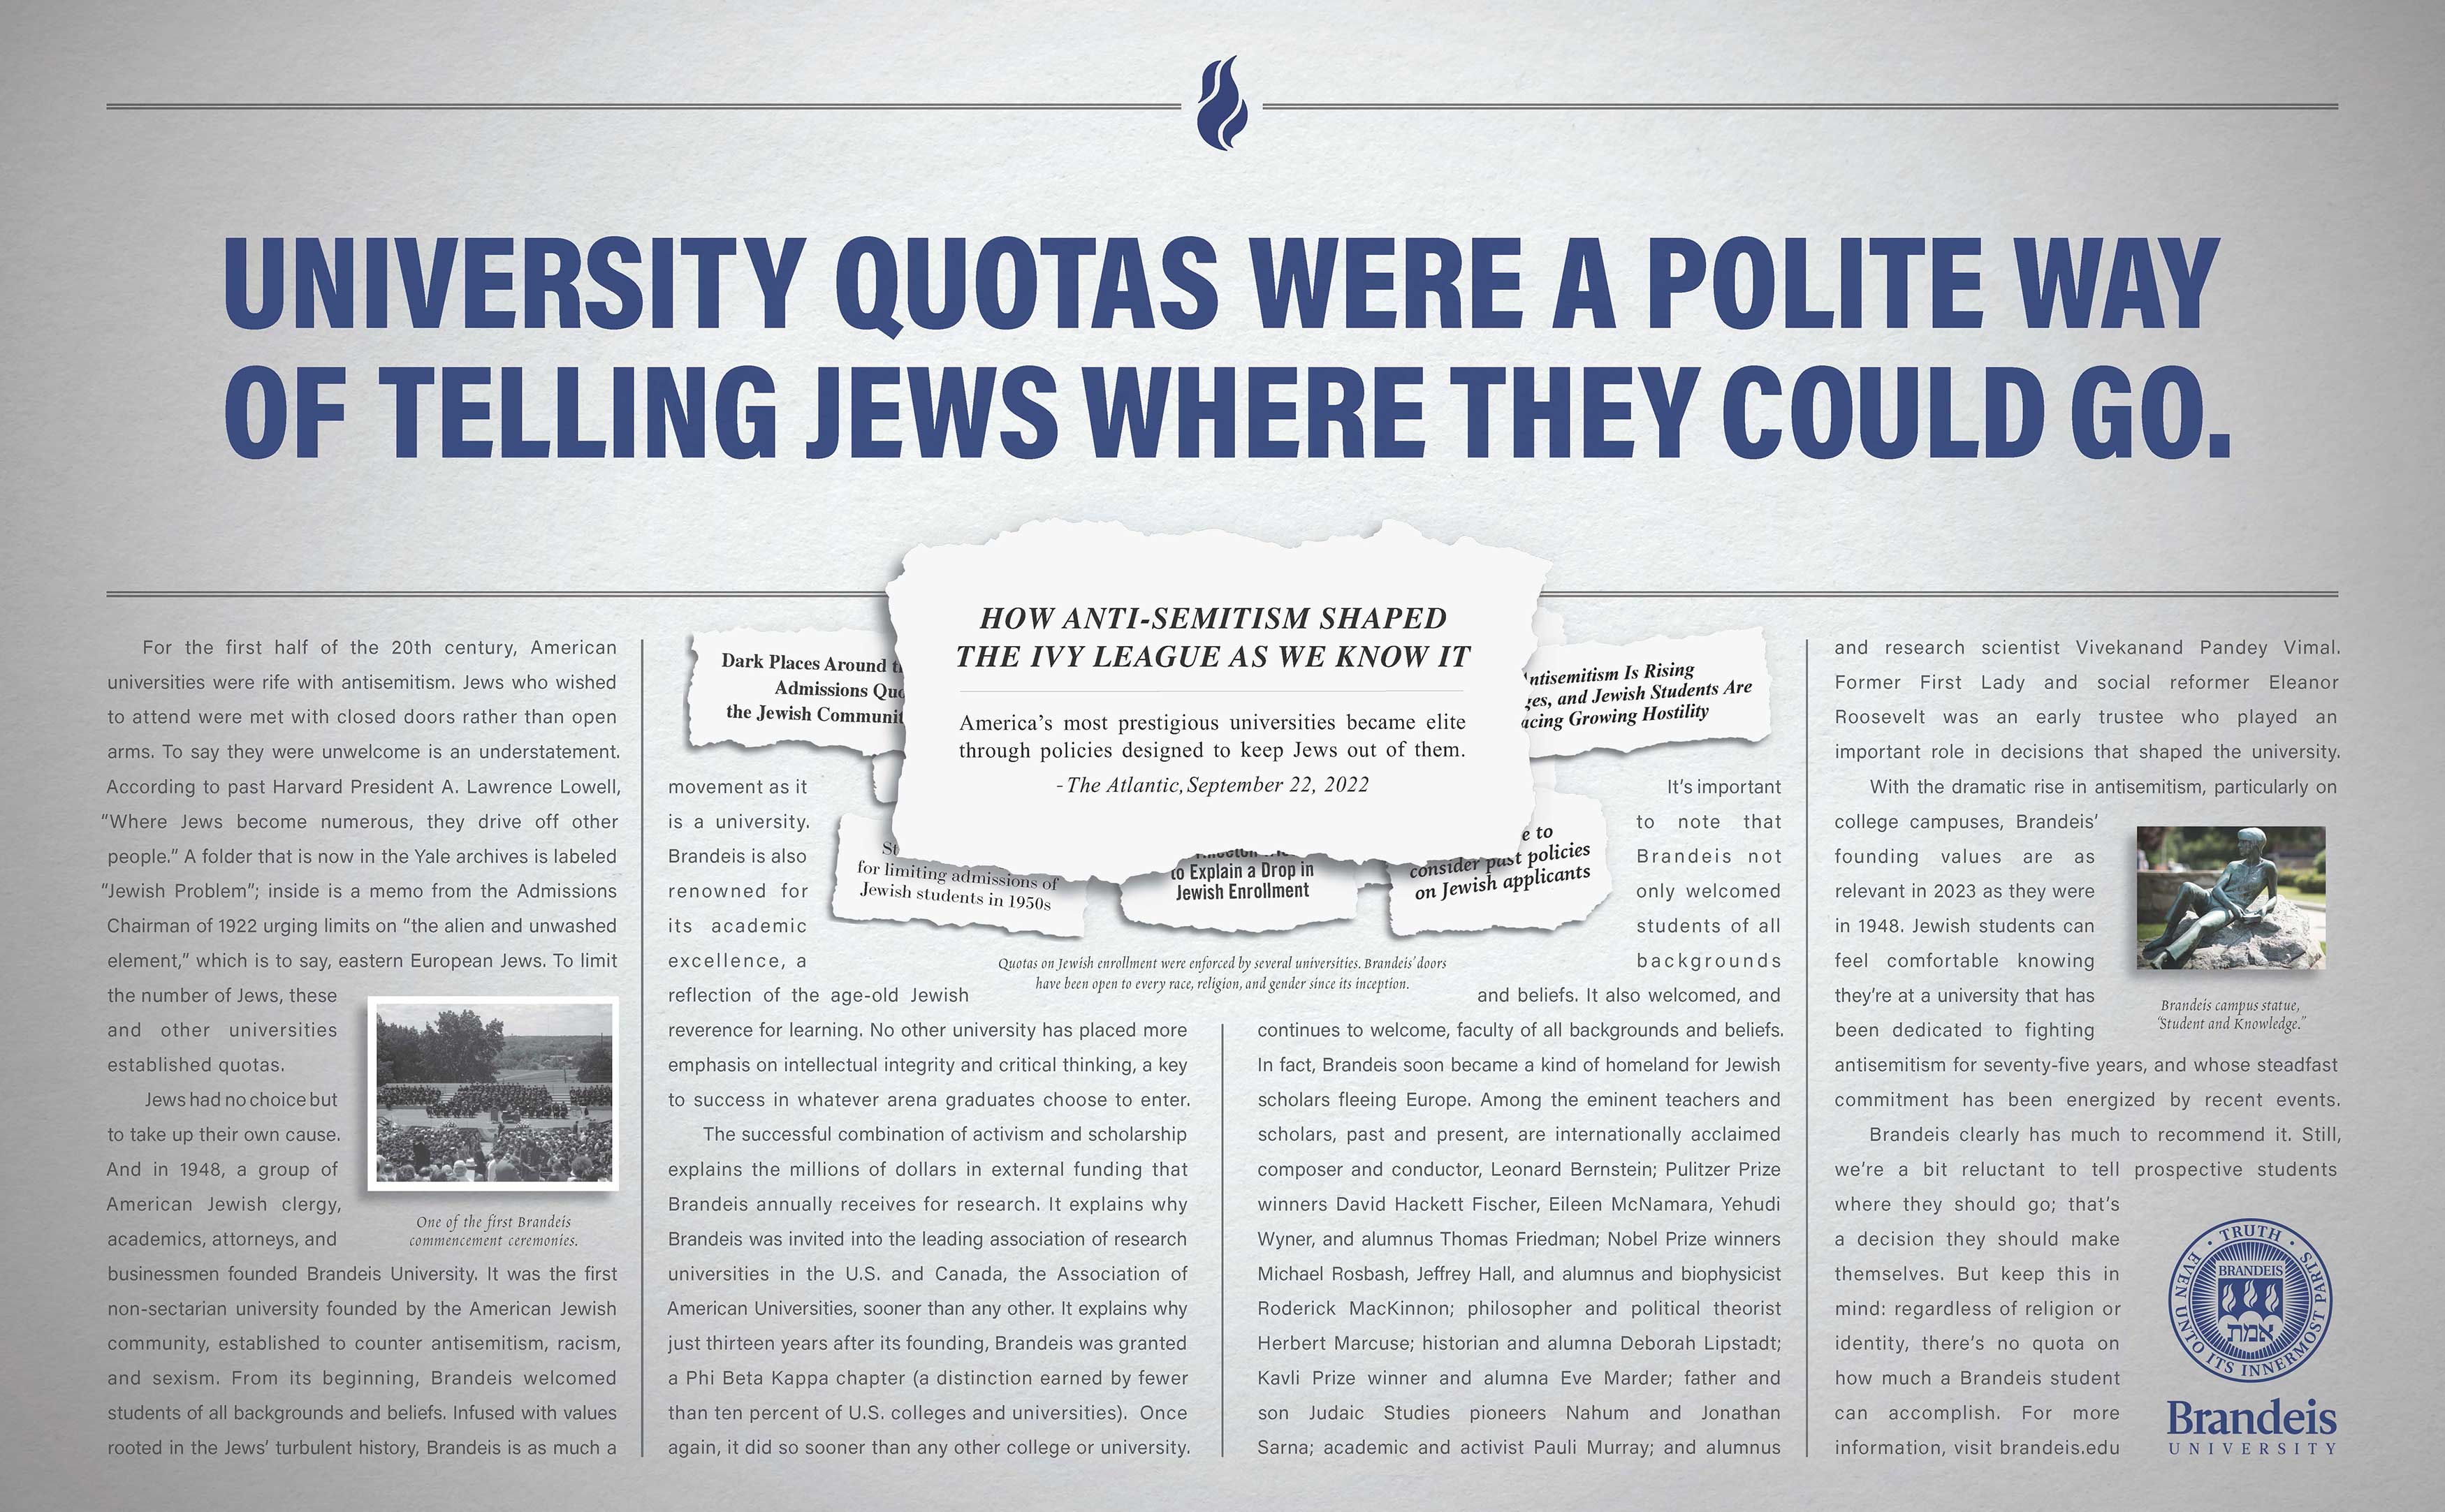 Ad headline: University quotas were a polite way of telling Jews where they could go. Ad text: For the first half of the 20th century, American universities were rife with antisemitism. Jews who wished to attend were met with closed doors rather than open arms. To say they were unwelcome is an understatement. According to past Harvard President A. Lawrence Lowell, “Where Jews become numerous, they drive off other people.” A folder that is now in the Yale archives is labeled “Jewish Problem”; inside is a memo from the Admissions Chairman of 1922 urging limits on “the alien and unwashed element,” which is to say, eastern European Jews. To limit the number of Jews, these and other universities established quotas. (Inline image of newspaper headlines with the caption: Quotas on Jewish enrollment were enforced by several universities. Brandeis’ doors have been open to every race, religion, and gender since its inception.) Jews had no choice but to take up their own cause. And in 1948, a group of American Jewish clergy, academics, attorneys, and businessmen founded Brandeis University. It was the first non-sectarian university founded by the American Jewish community, established to counter antisemitism, racism, and sexism. From its beginning, Brandeis welcomed students of all backgrounds and beliefs. Infused with values rooted in the Jews’ turbulent history, Brandeis is as much a movement as it is a university. Brandeis is also renowned for its academic excellence, a reflection of the age-old Jewish reverence for learning. No other university has placed more emphasis on intellectual integrity and critical thinking, a key to success in whatever arena graduates choose to enter. The successful combination of activism and scholarship explains the millions of dollars in external funding that Brandeis annually receives for research. It explains why Brandeis was invited into the leading association of research universities in the U.S. and Canada, the Association of American Universities, sooner than any other. It explains why just thirteen years after its founding, Brandeis was granted a Phi Beta Kappa chapter (a distinction earned by fewer than ten percent of U.S. colleges and universities). Once again, it did so sooner than any other college or university. (Inline image: One of the first Brandeis commencement ceremonies.) It’s important to note that Brandeis not only welcomed students of all backgrounds and beliefs. It also welcomed, and continues to welcome, faculty of all backgrounds and beliefs. In fact, Brandeis soon became a kind of homeland for Jewish scholars fleeing Europe. Among the eminent teachers and scholars, past and present, are internationally acclaimed composer and conductor, Leonard Bernstein; Pulitzer Prize winners David Hackett Fischer, Eileen McNamara, Yehudi Wyner, and alumnus Thomas Friedman; Nobel Prize winners Michael Rosbash, Jeffrey Hall, and alumnus and biophysicist Roderick MacKinnon; philosopher and political theorist Herbert Marcuse; historian and alumna Deborah Lipstadt; Kavli Prize winner and alumna Eve Marder; father and son Judaic Studies pioneers Nahum and Jonathan Sarna; academic and activist Pauli Murray; and alumnus and research scientist Vivekanand Pandey Vimal. Former First Lady and social reformer Eleanor Roosevelt was  an early trustee who played an important role in decisions that shaped the university. (Inline image: Brandeis campus statue, “Student and Knowledge.”) With the dramatic rise in antisemitism, particularly on college campuses, Brandeis’ founding values are as relevant in 2023 as they were in 1948. Jewish students can feel comfortable knowing they’re at a university that has been dedicated to fighting antisemitism for seventy-five years, and whose steadfast commitment has been energized by recent events. Brandeis clearly has much to recommend it. Still, we’re a bit reluctant to tell prospective students where they should go; that’s a decision they should make themselves. But keep this in mind: regardless of religion or identity, there’s no quota on how much a Brandeis student can accomplish.